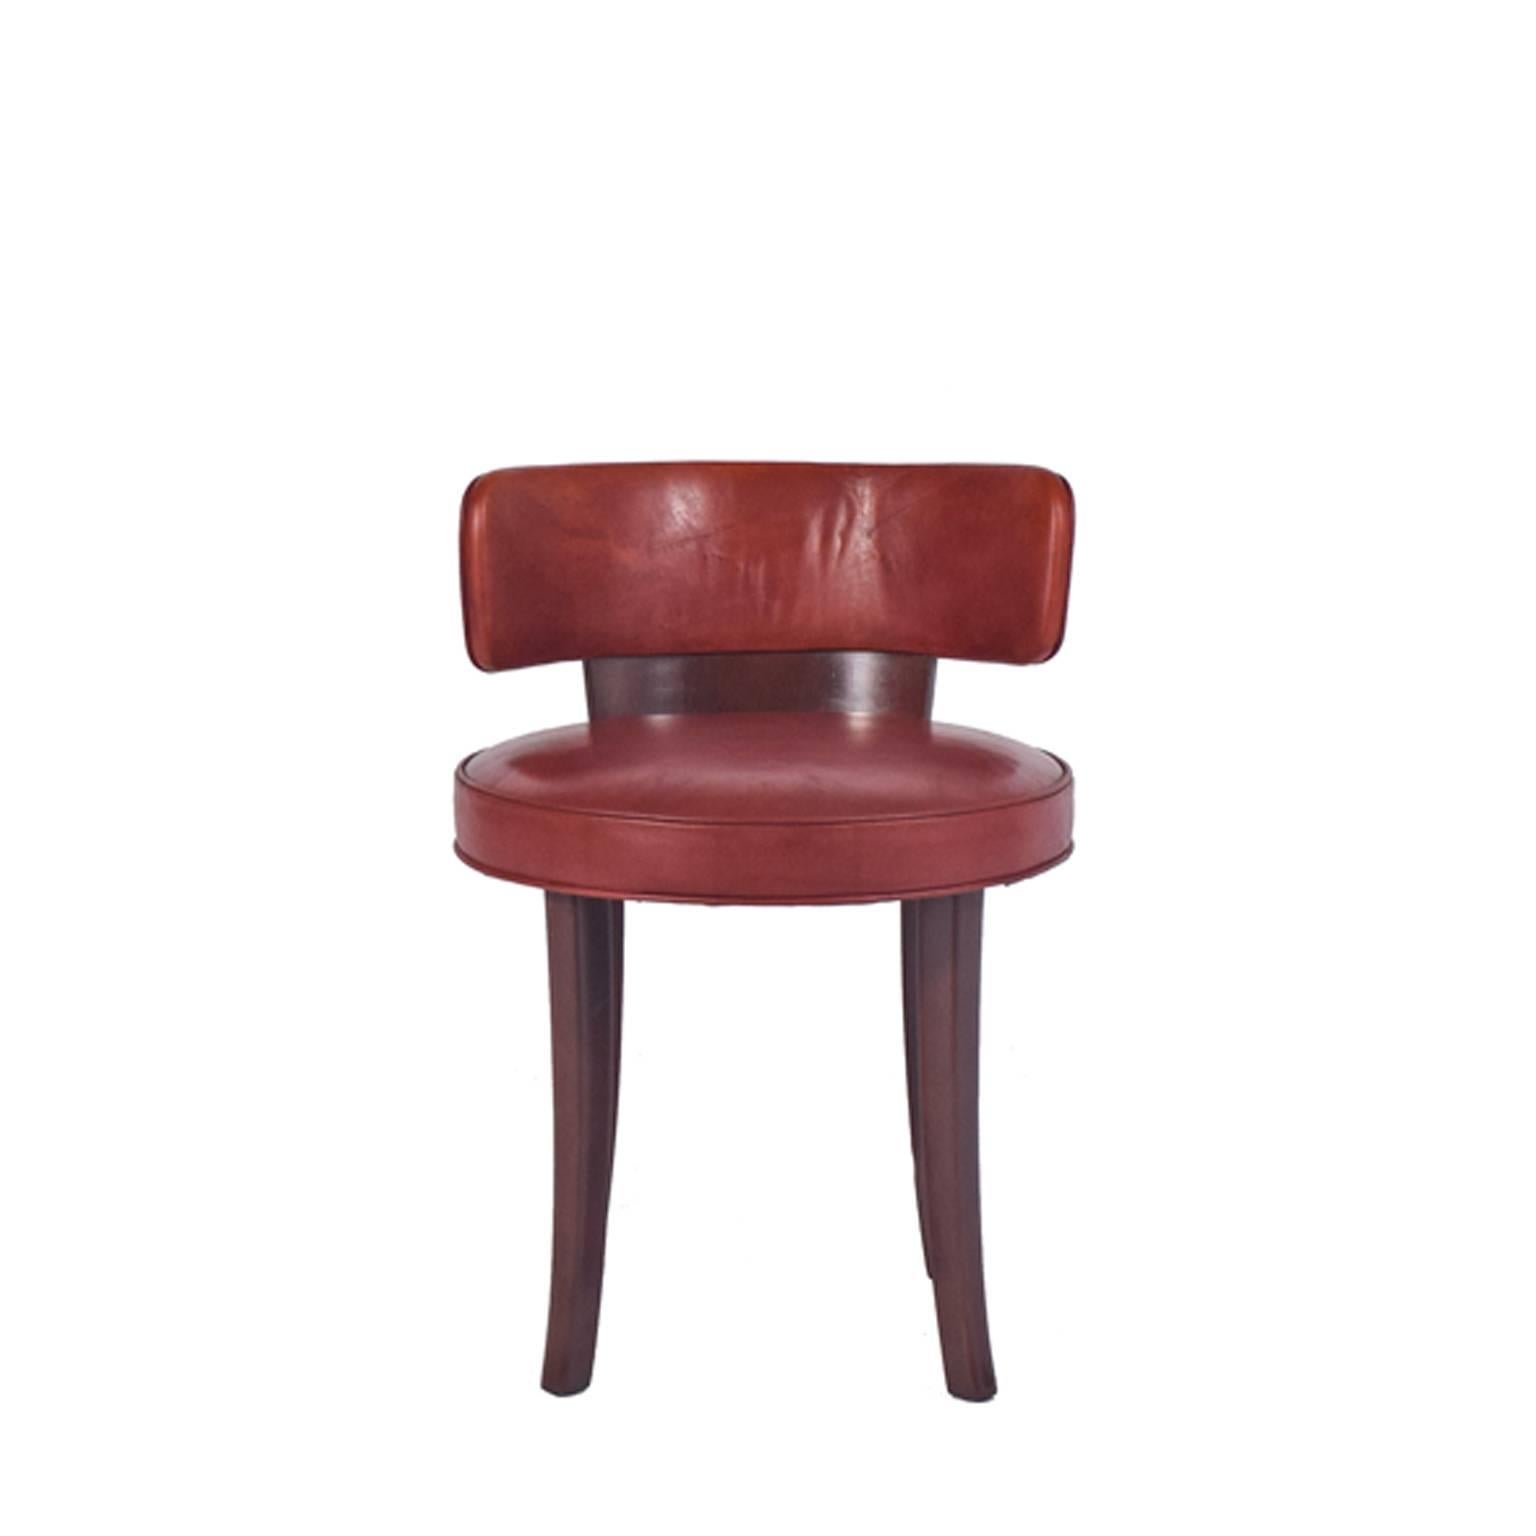 Wonderfull Vanity/Occasional quarter moon low back chair. Round seat supported on four curved mahogany stained beechwood legs with red veg cow hide upholstery.